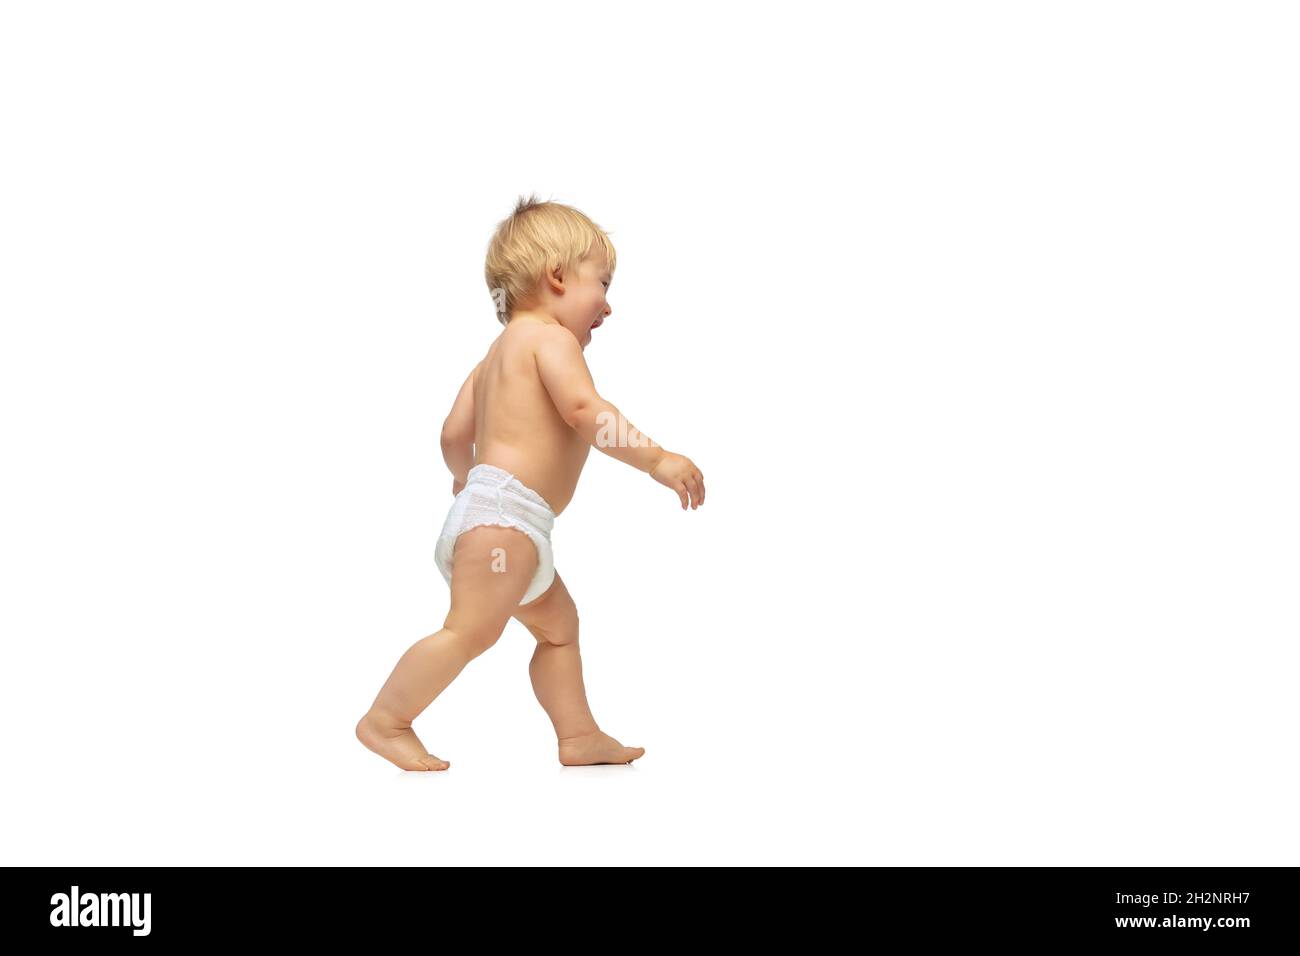 Toddler Walking Diaper High Resolution Stock Photography and Images - Alamy